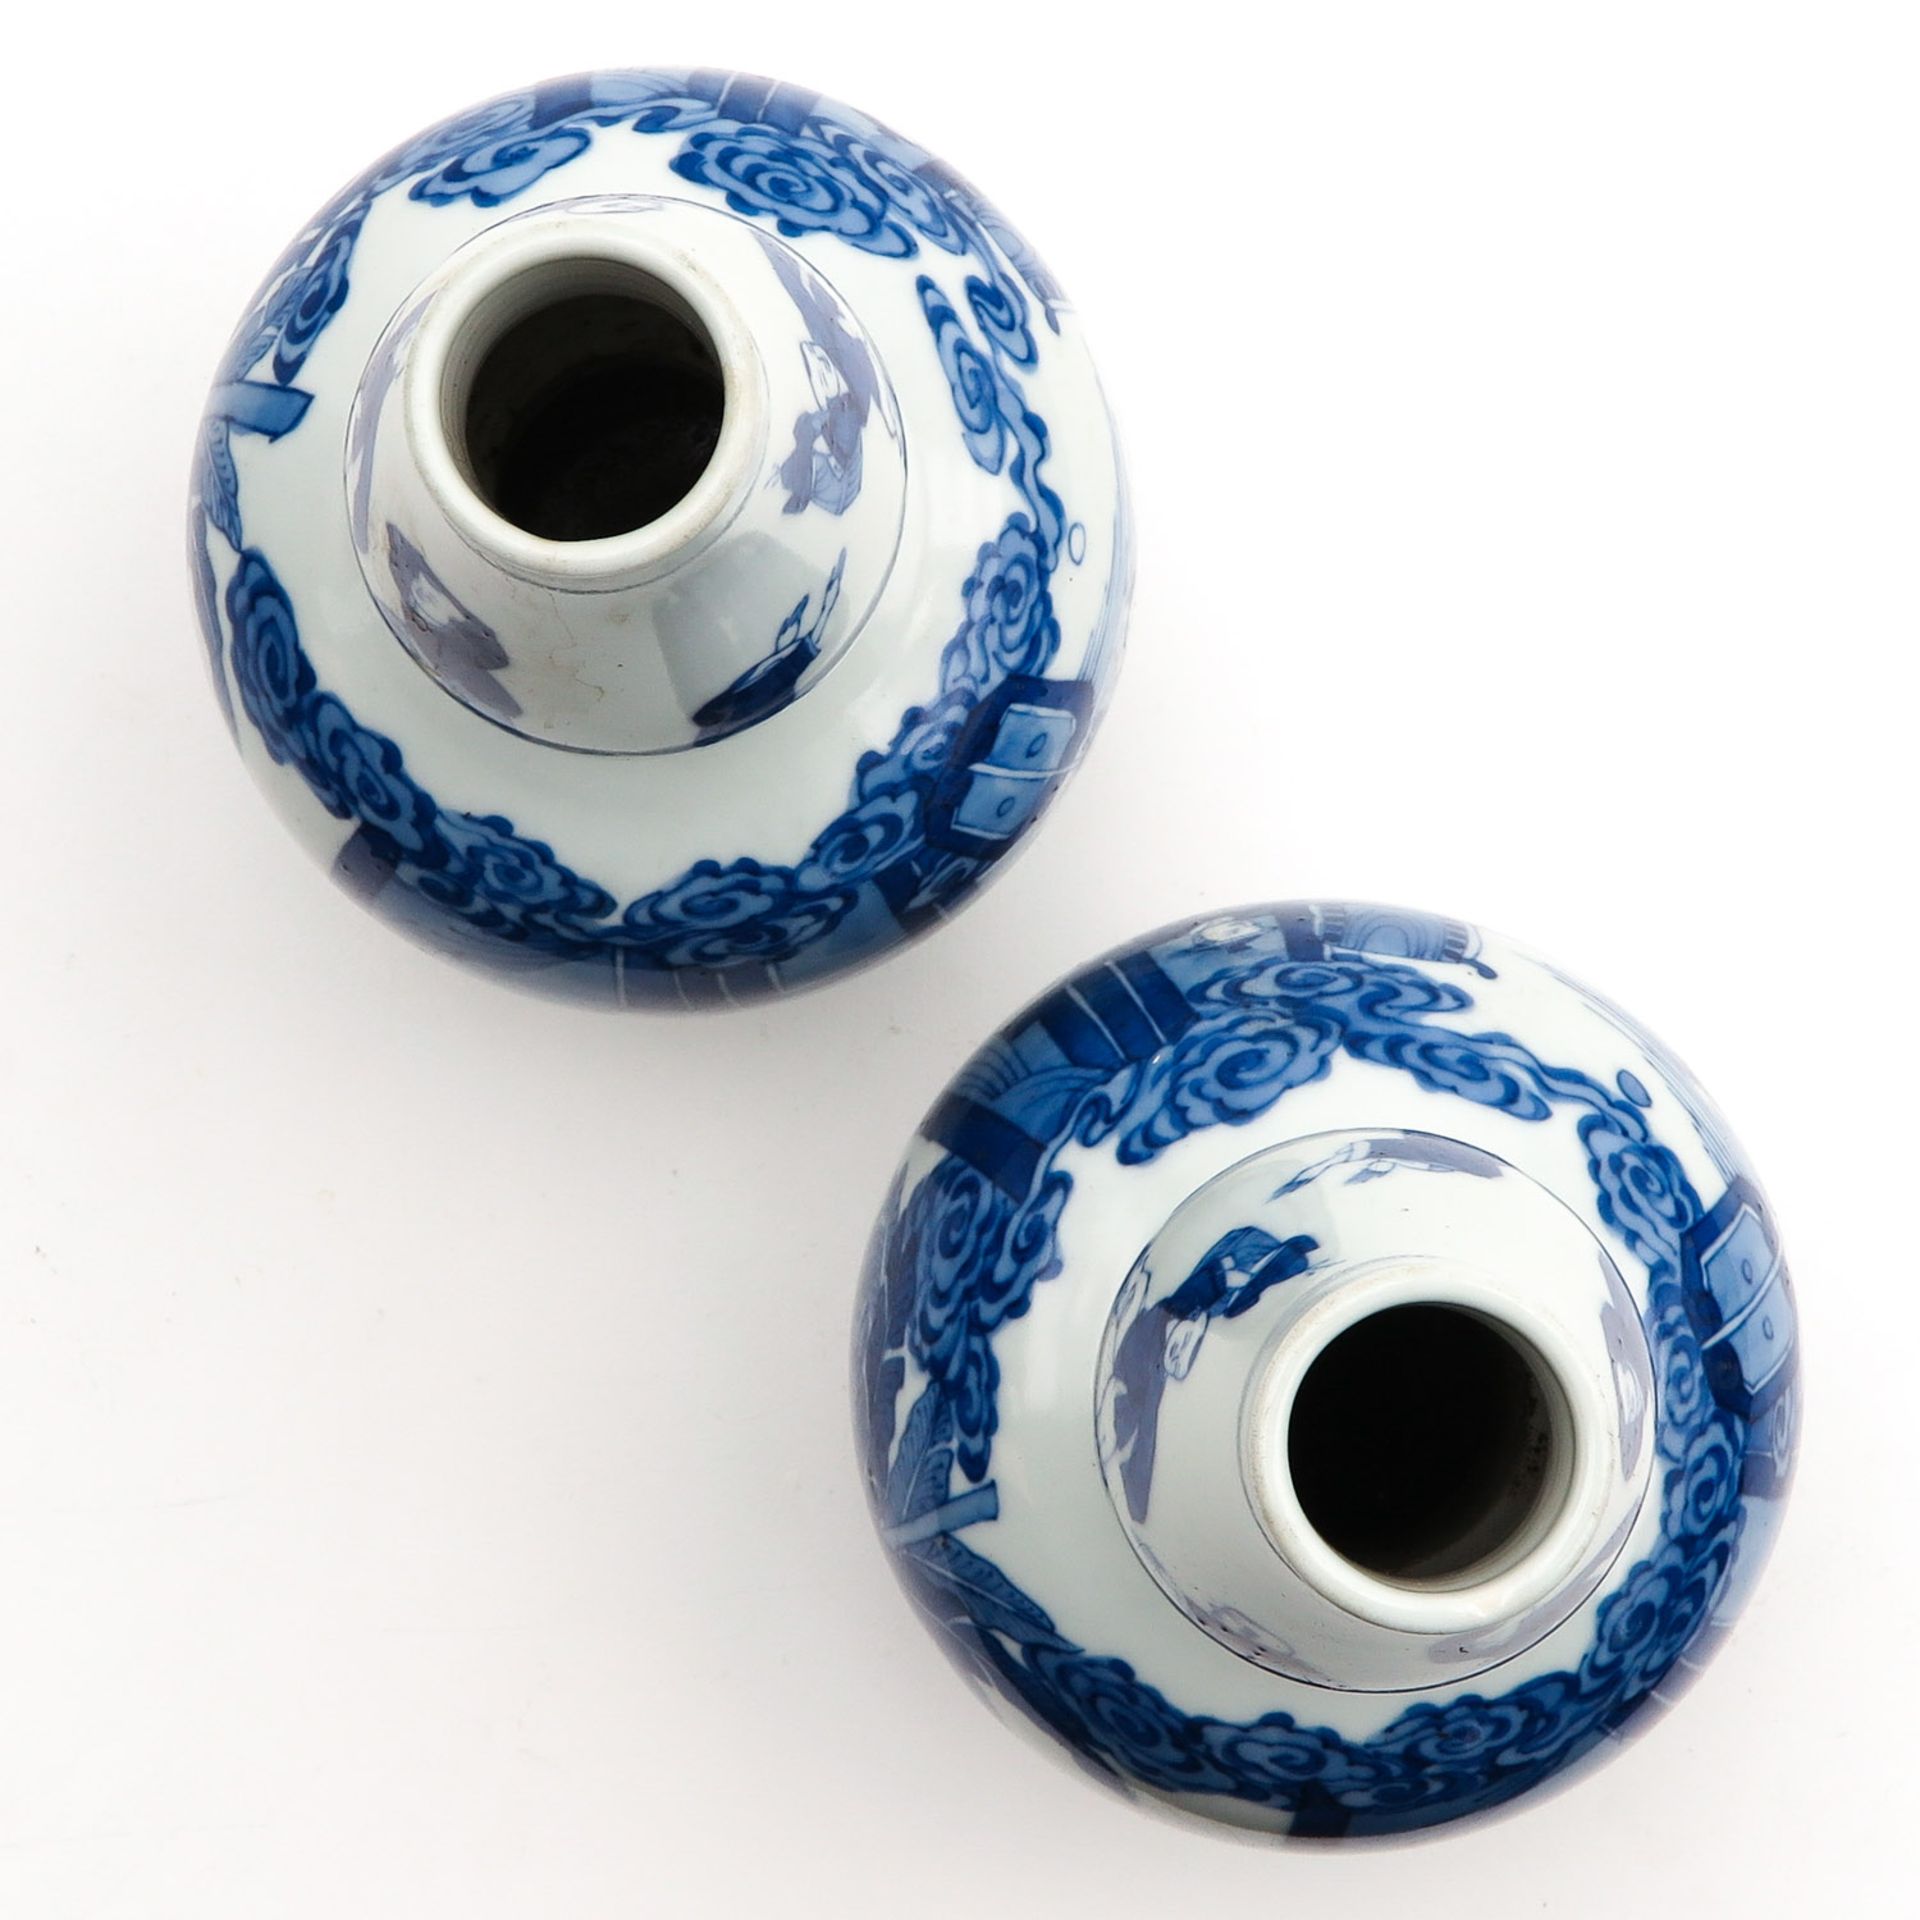 A Pair of Blue and White Gourd Vases - Image 5 of 10